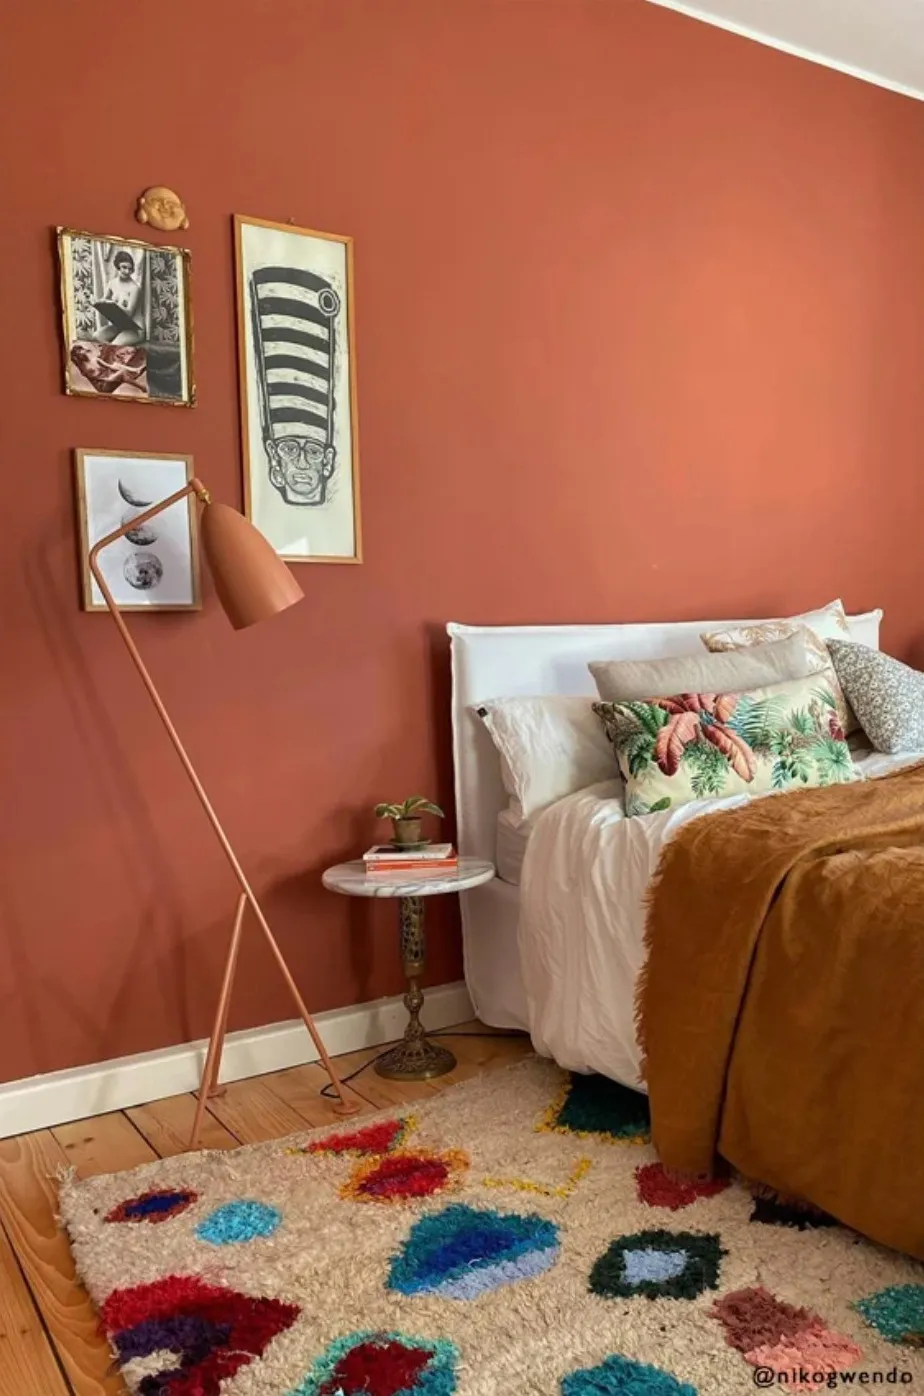 Bedroom painted in a warm red terracotta colour with a colourful rug and neutral bedding